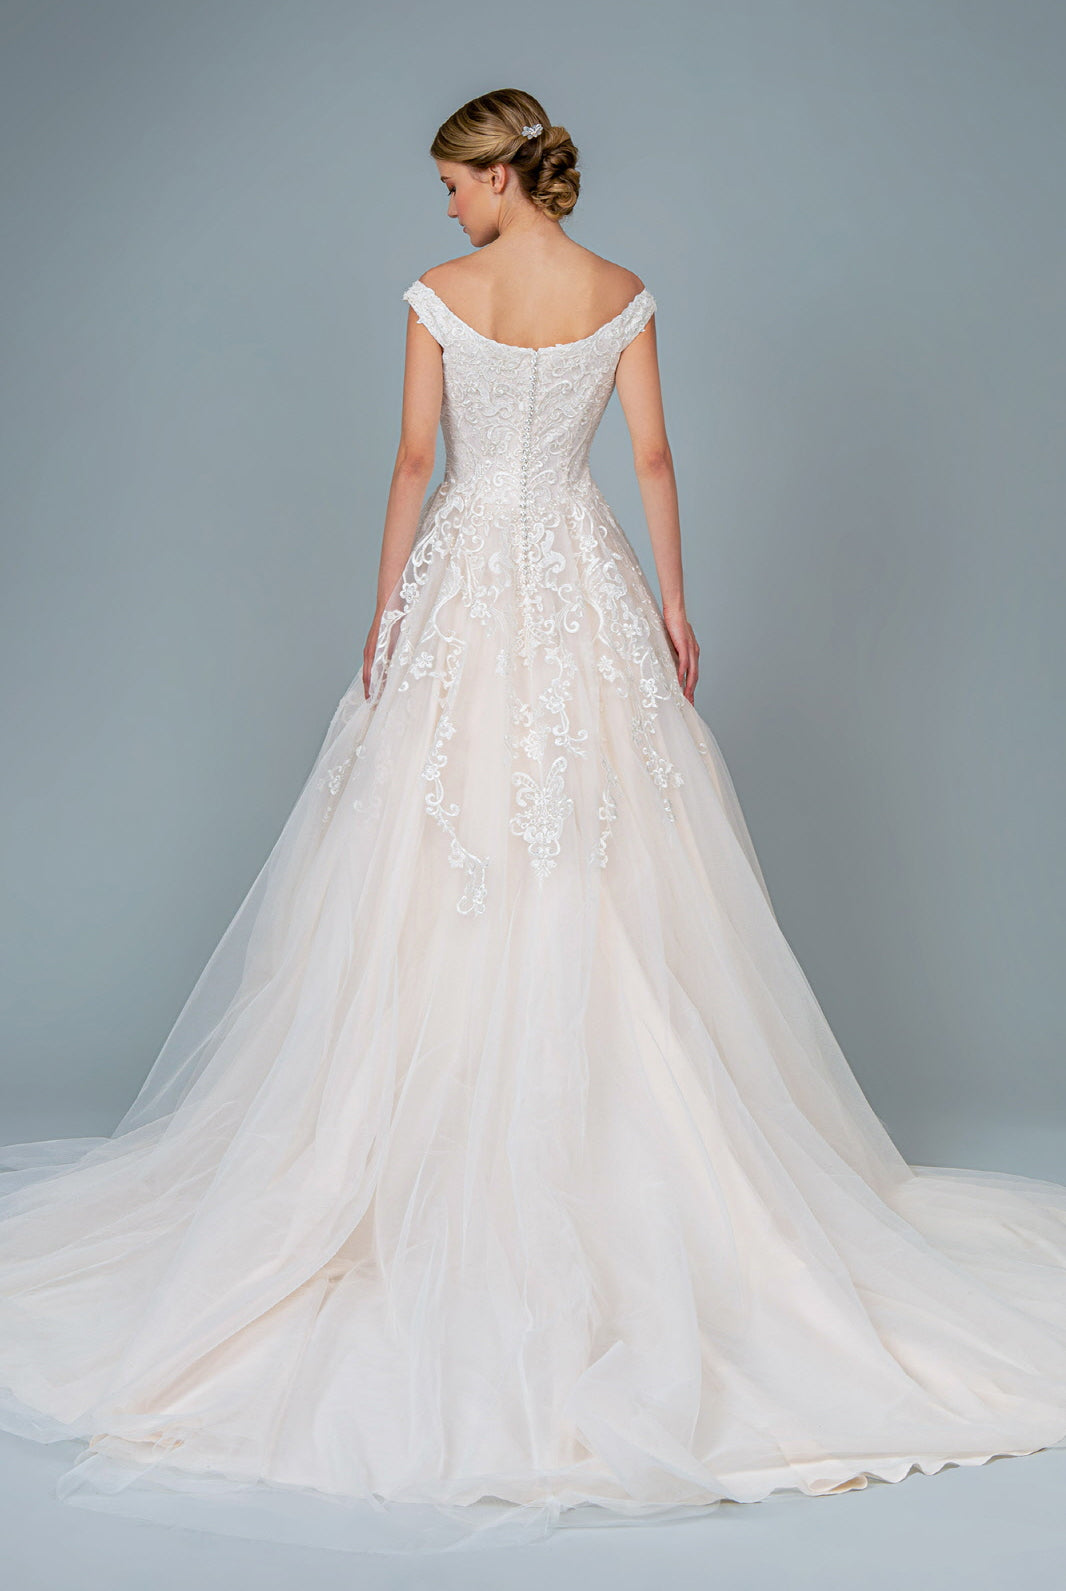 Embroidery Embellished Mesh A-Line Wedding Gown Tail GLGL1800-WEDDING GOWNS-smcfashion.com